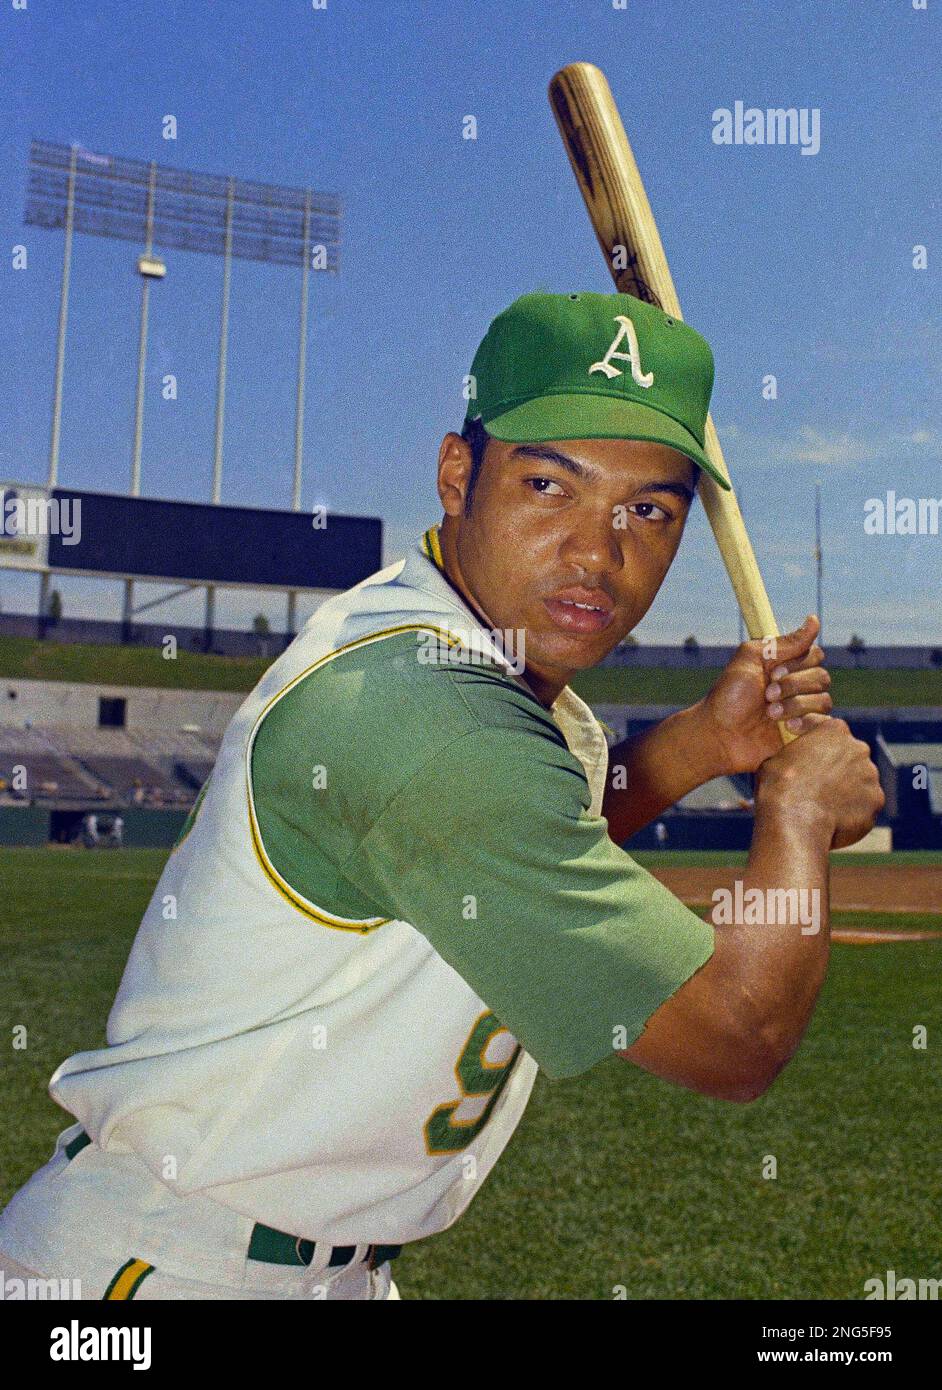 Oakland Athletics' player Reggie Jackson is shown with fans in